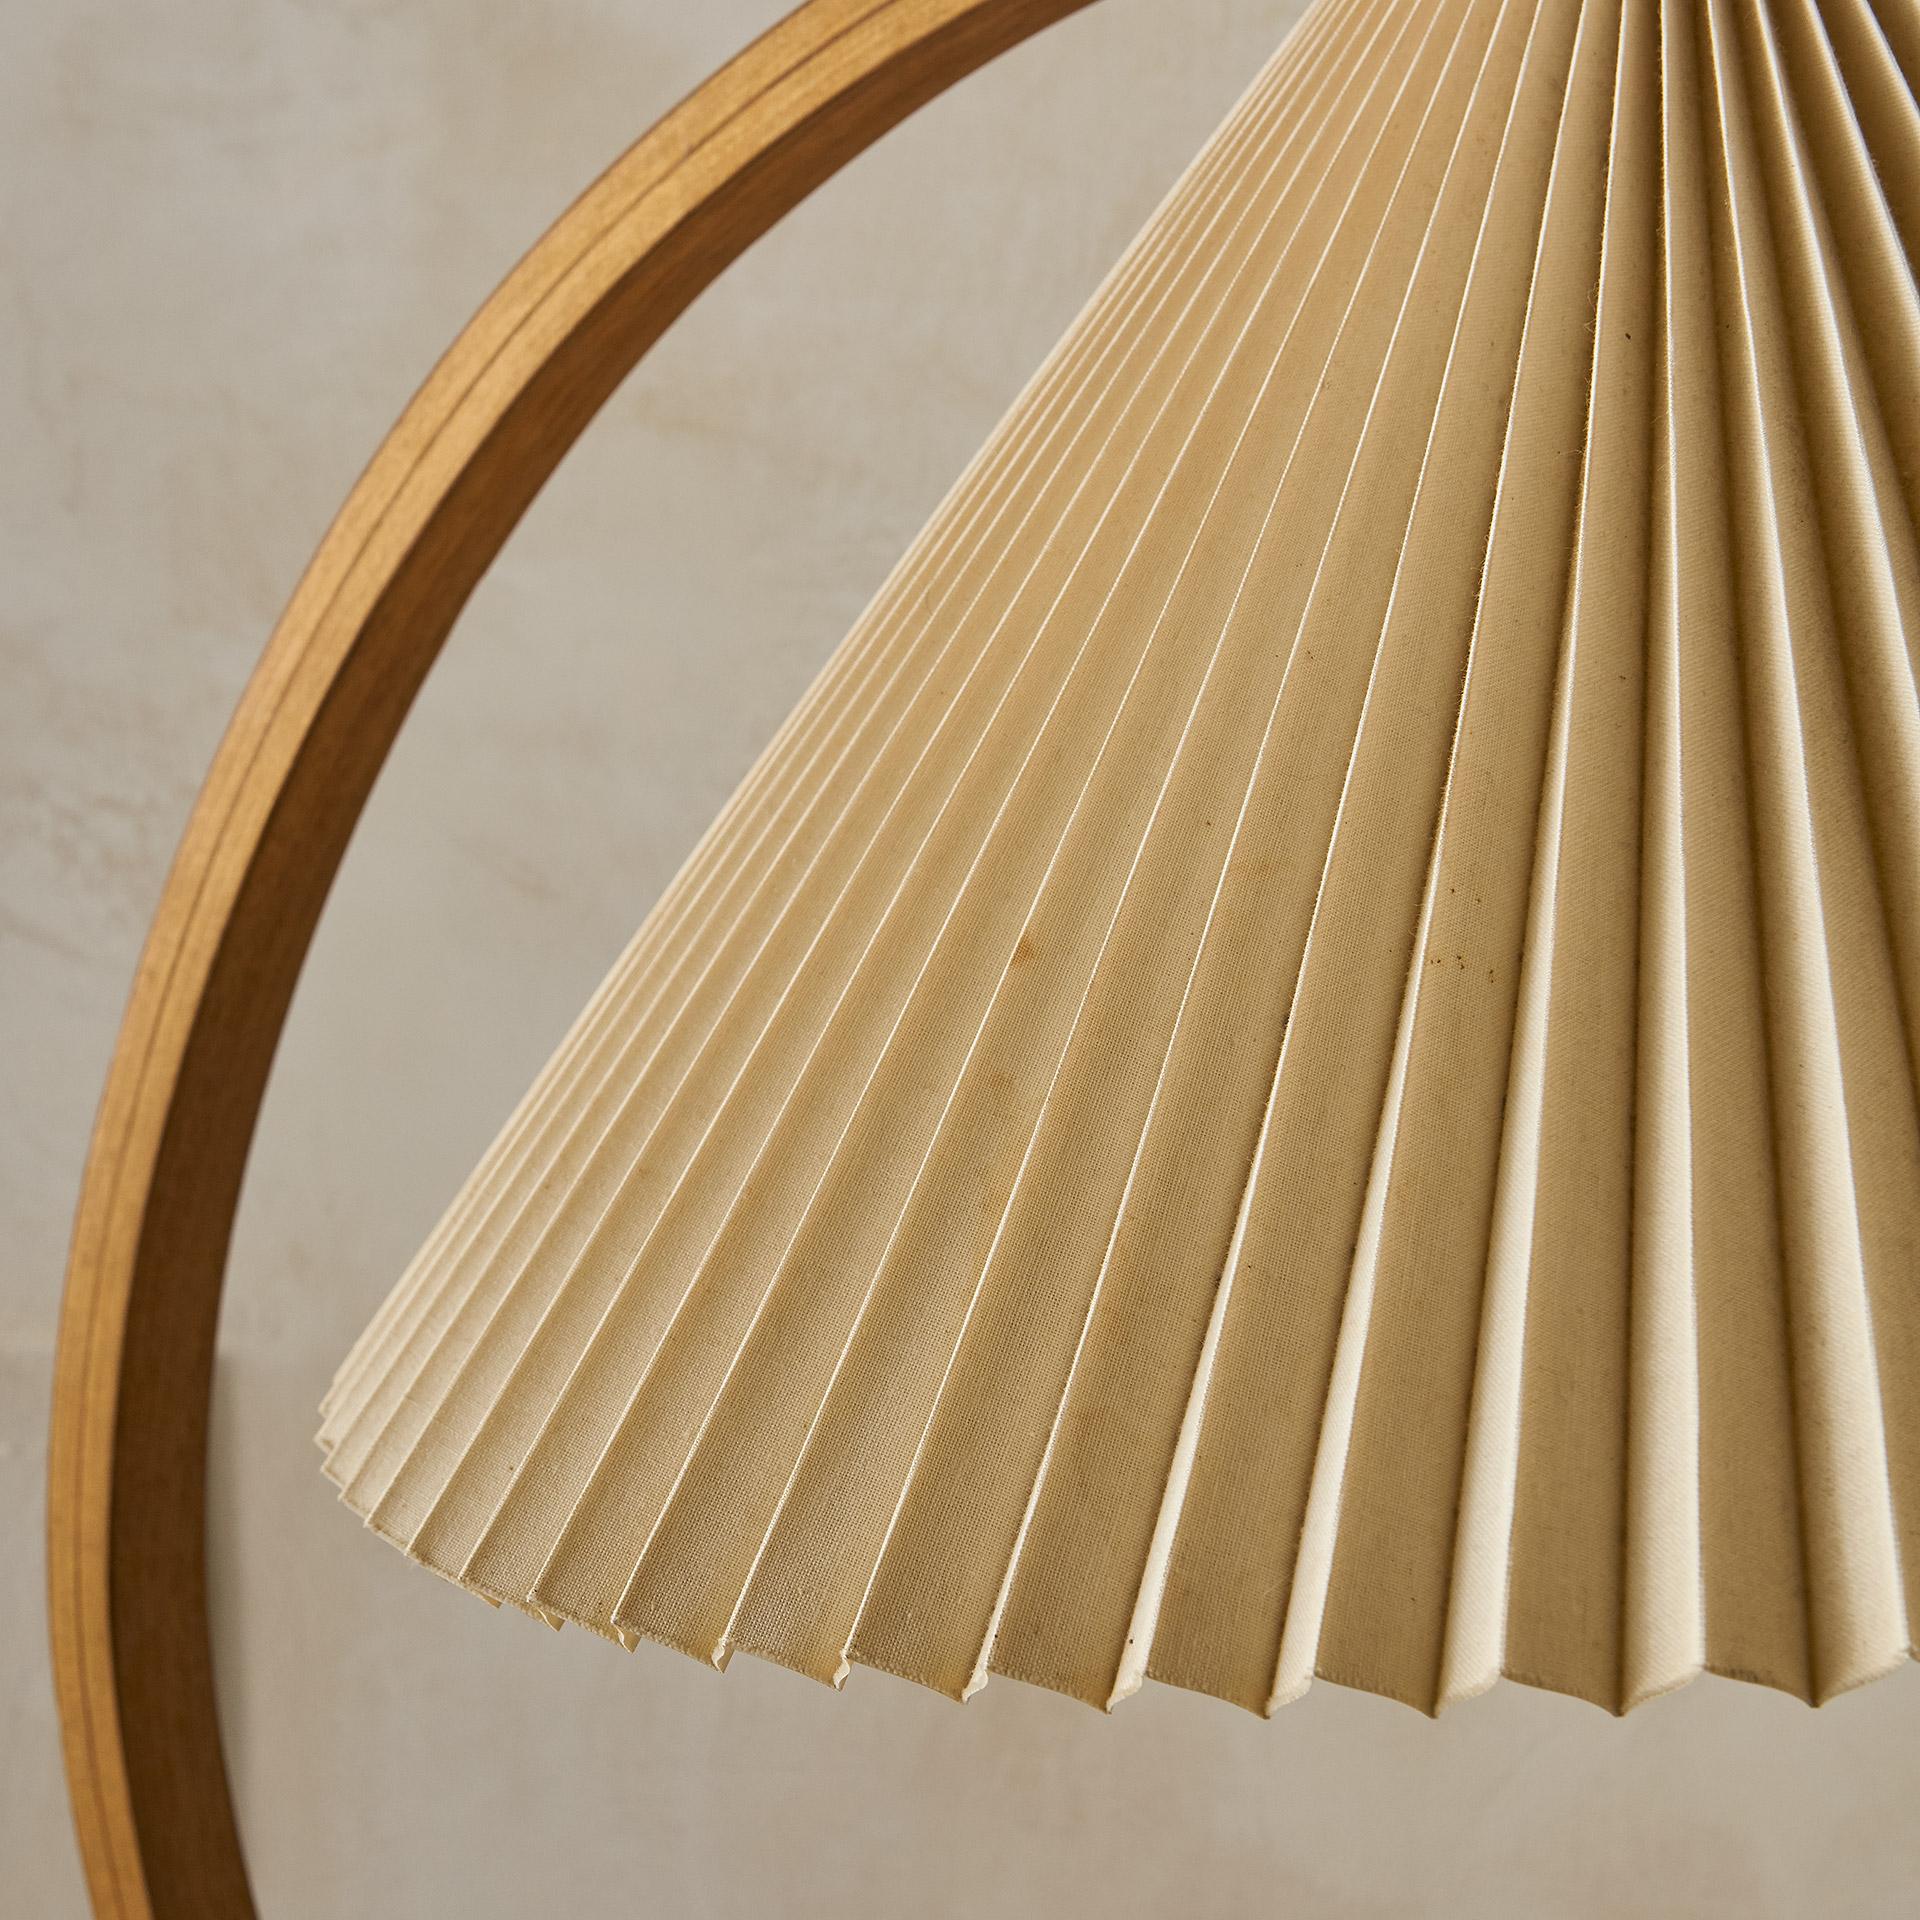 A Danish bentwood floor lamp designed in the 1970s for Caprani of Denmark. Featuring the original pleated shade; a C shaped metal base, a gorgeous bentwood wooden frame and a floor switch.